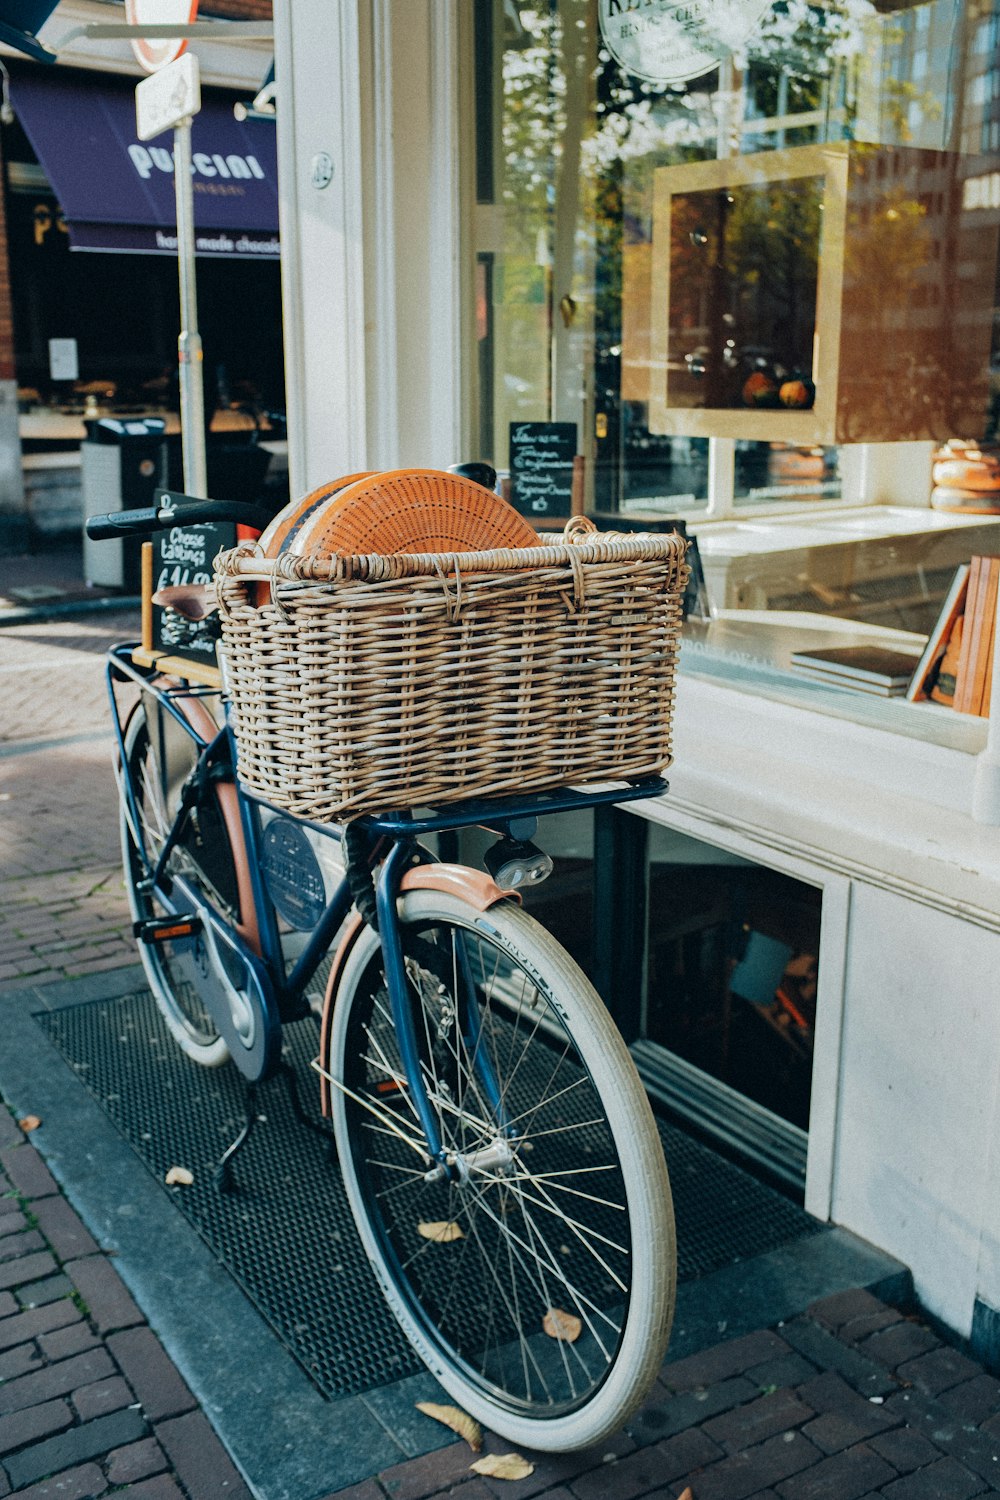 a bicycle with a basket on the front of it